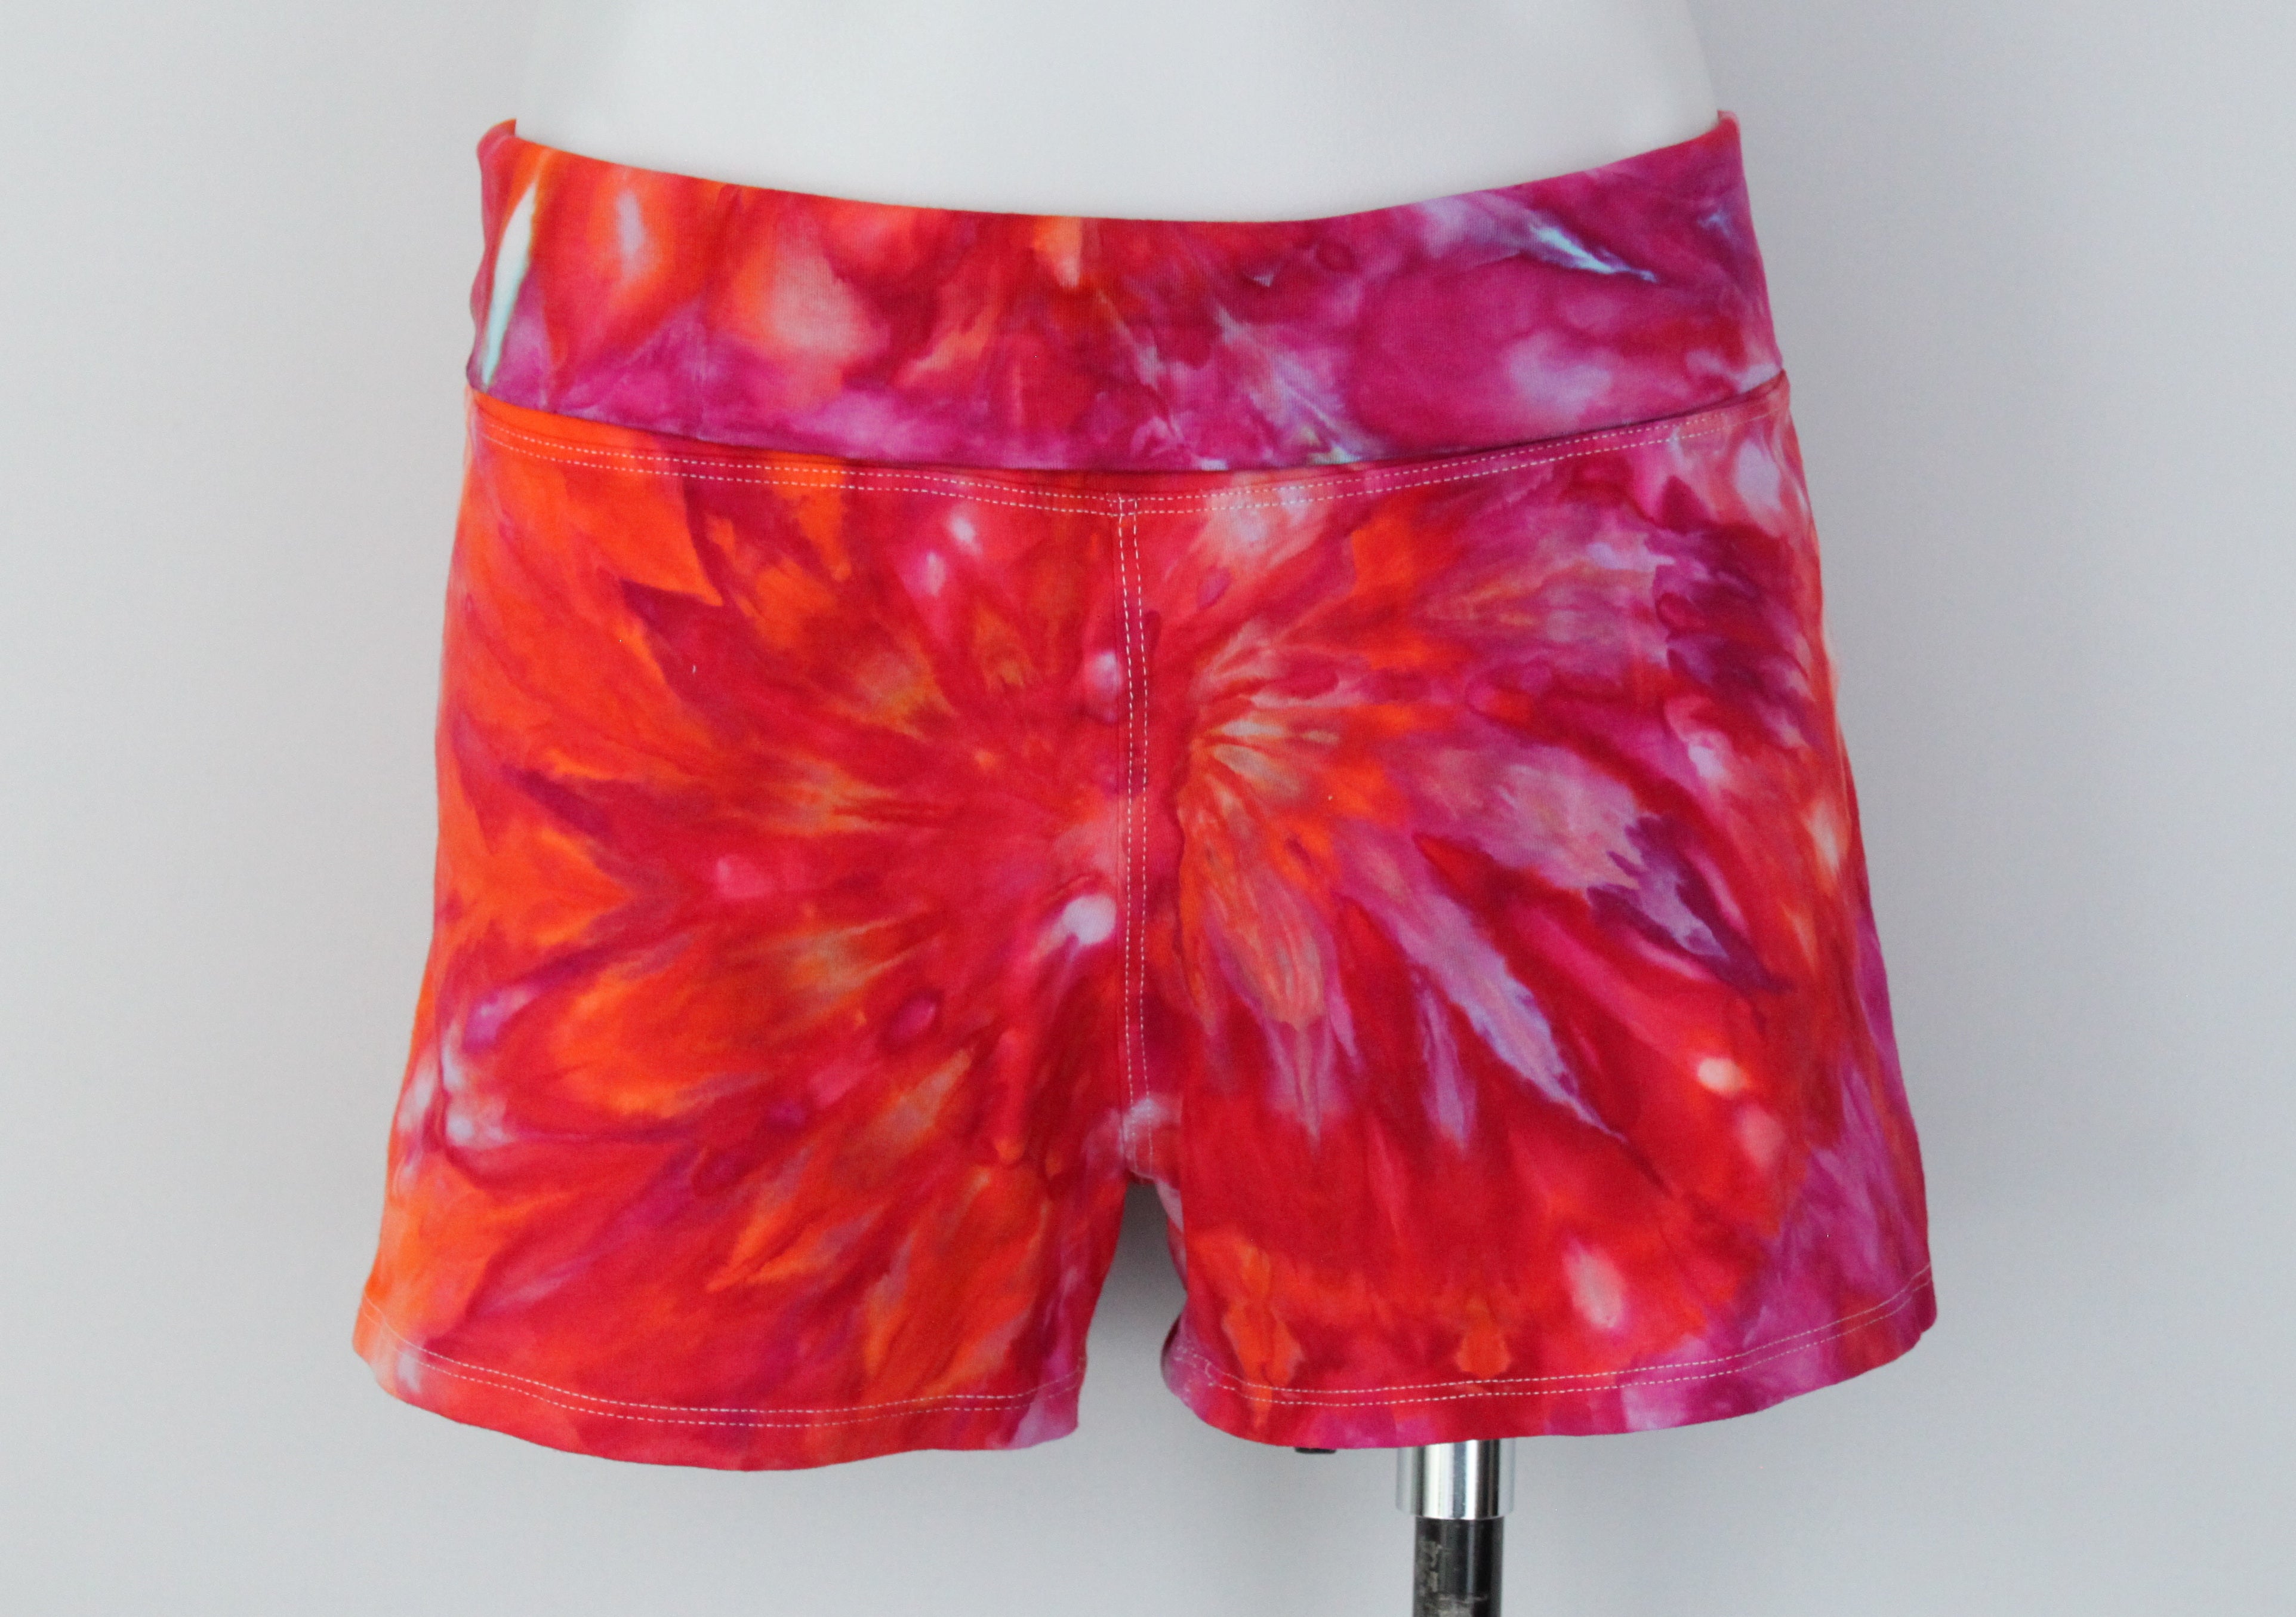 Yoga shorts size X Large - Sailor's Delight spiral